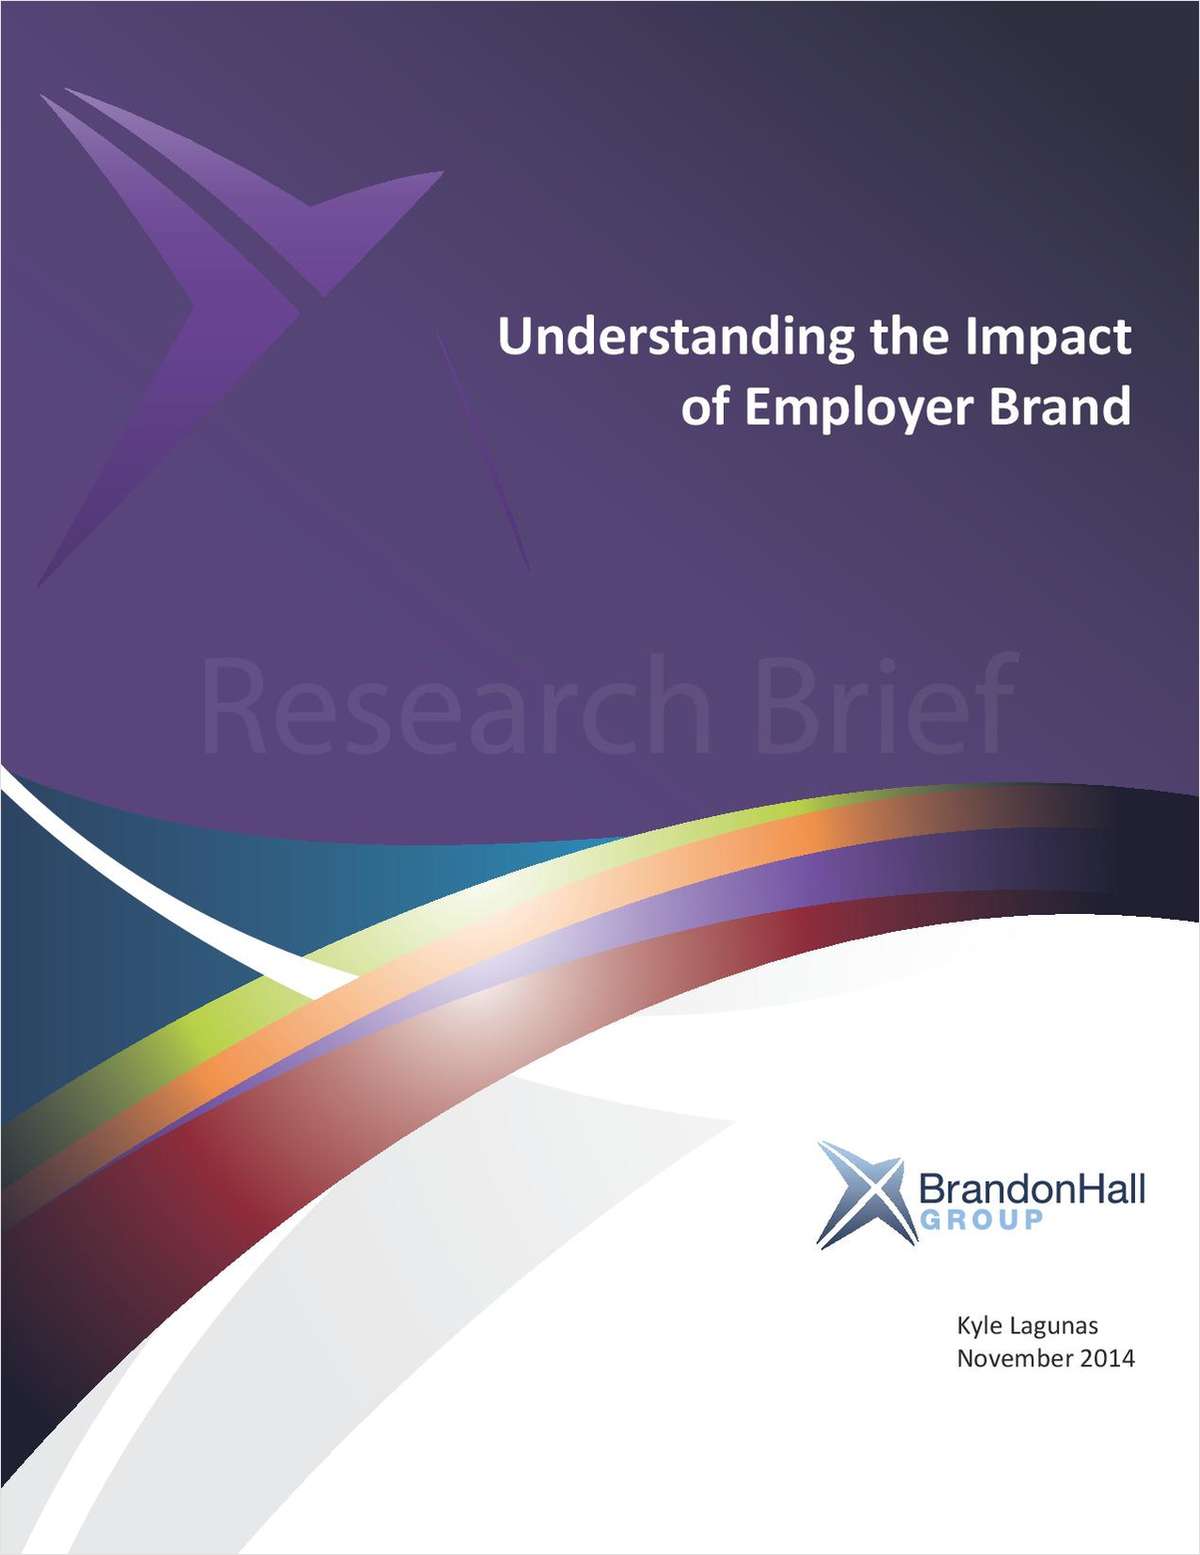 Understanding the Impact of your Employer Brand